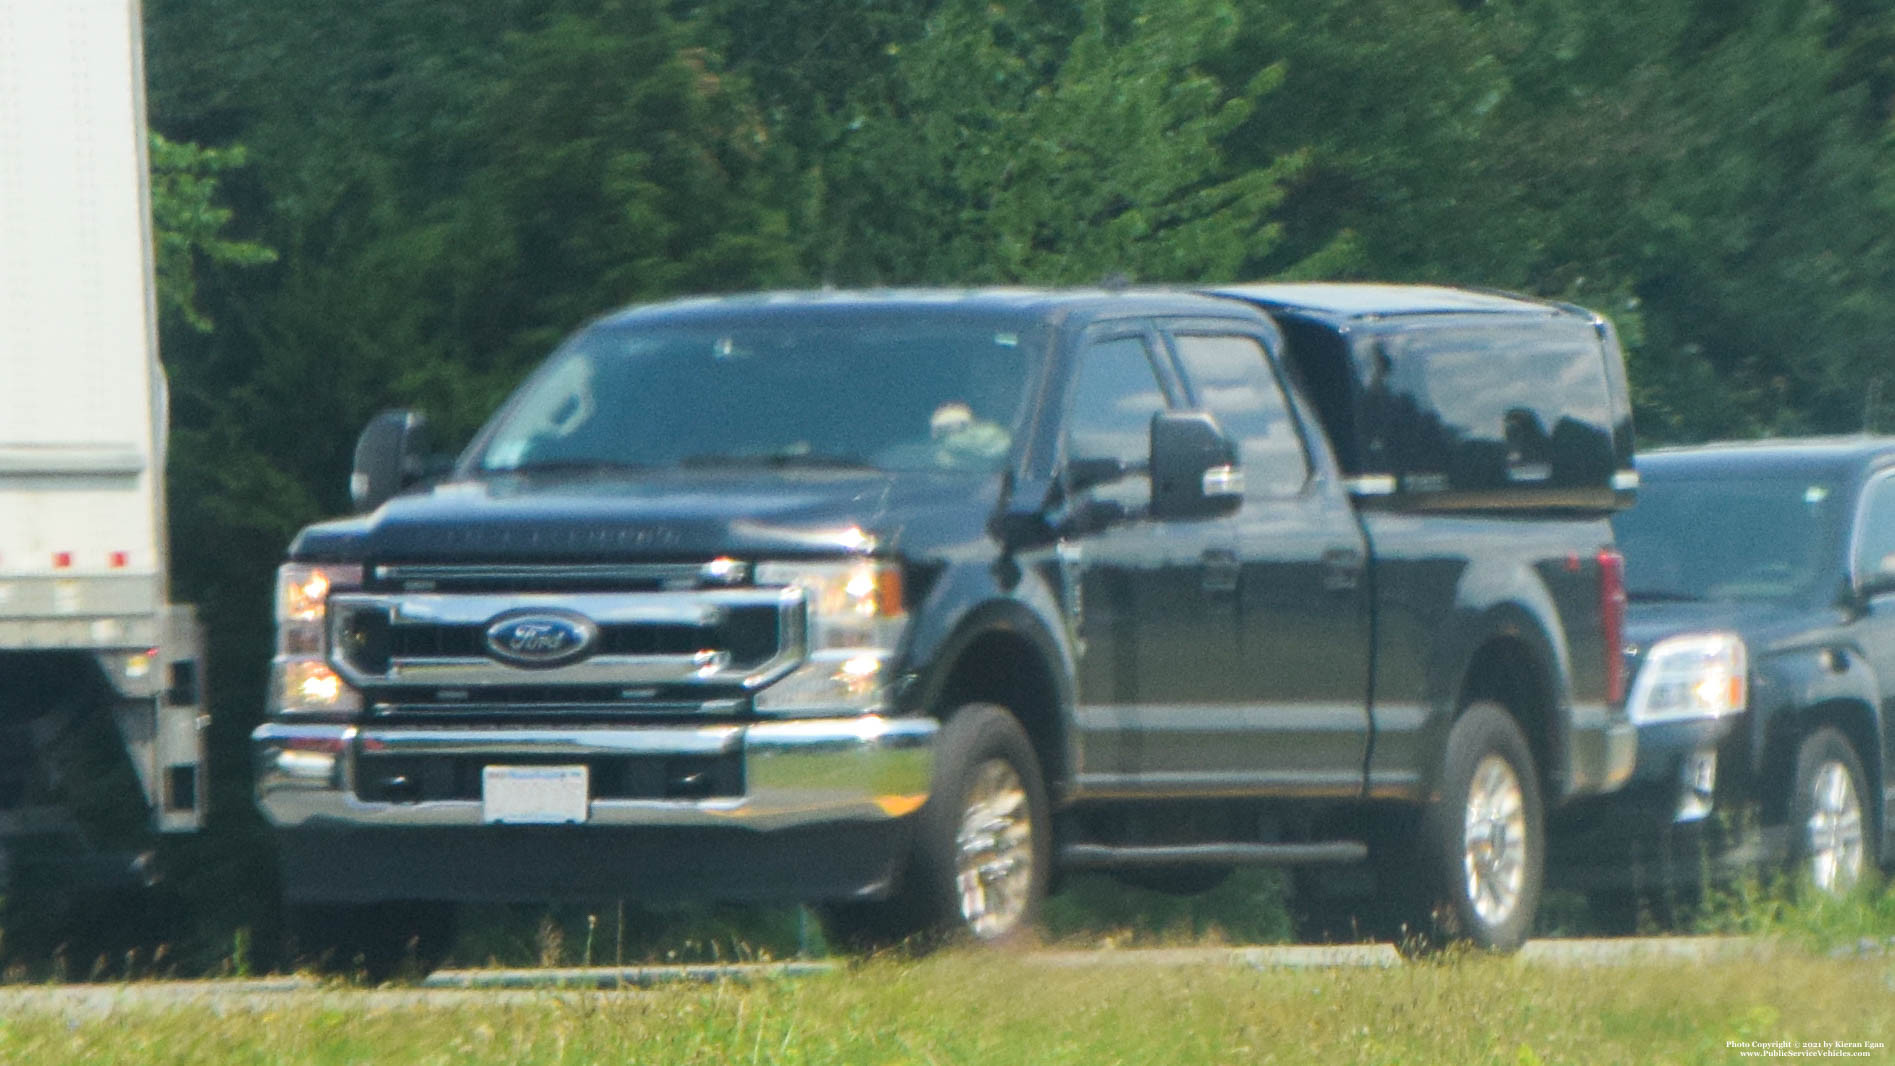 A photo  of Massachusetts State Police
            Unmarked Unit, a 2019 Ford F-350 XLT Crew Cab             taken by Kieran Egan